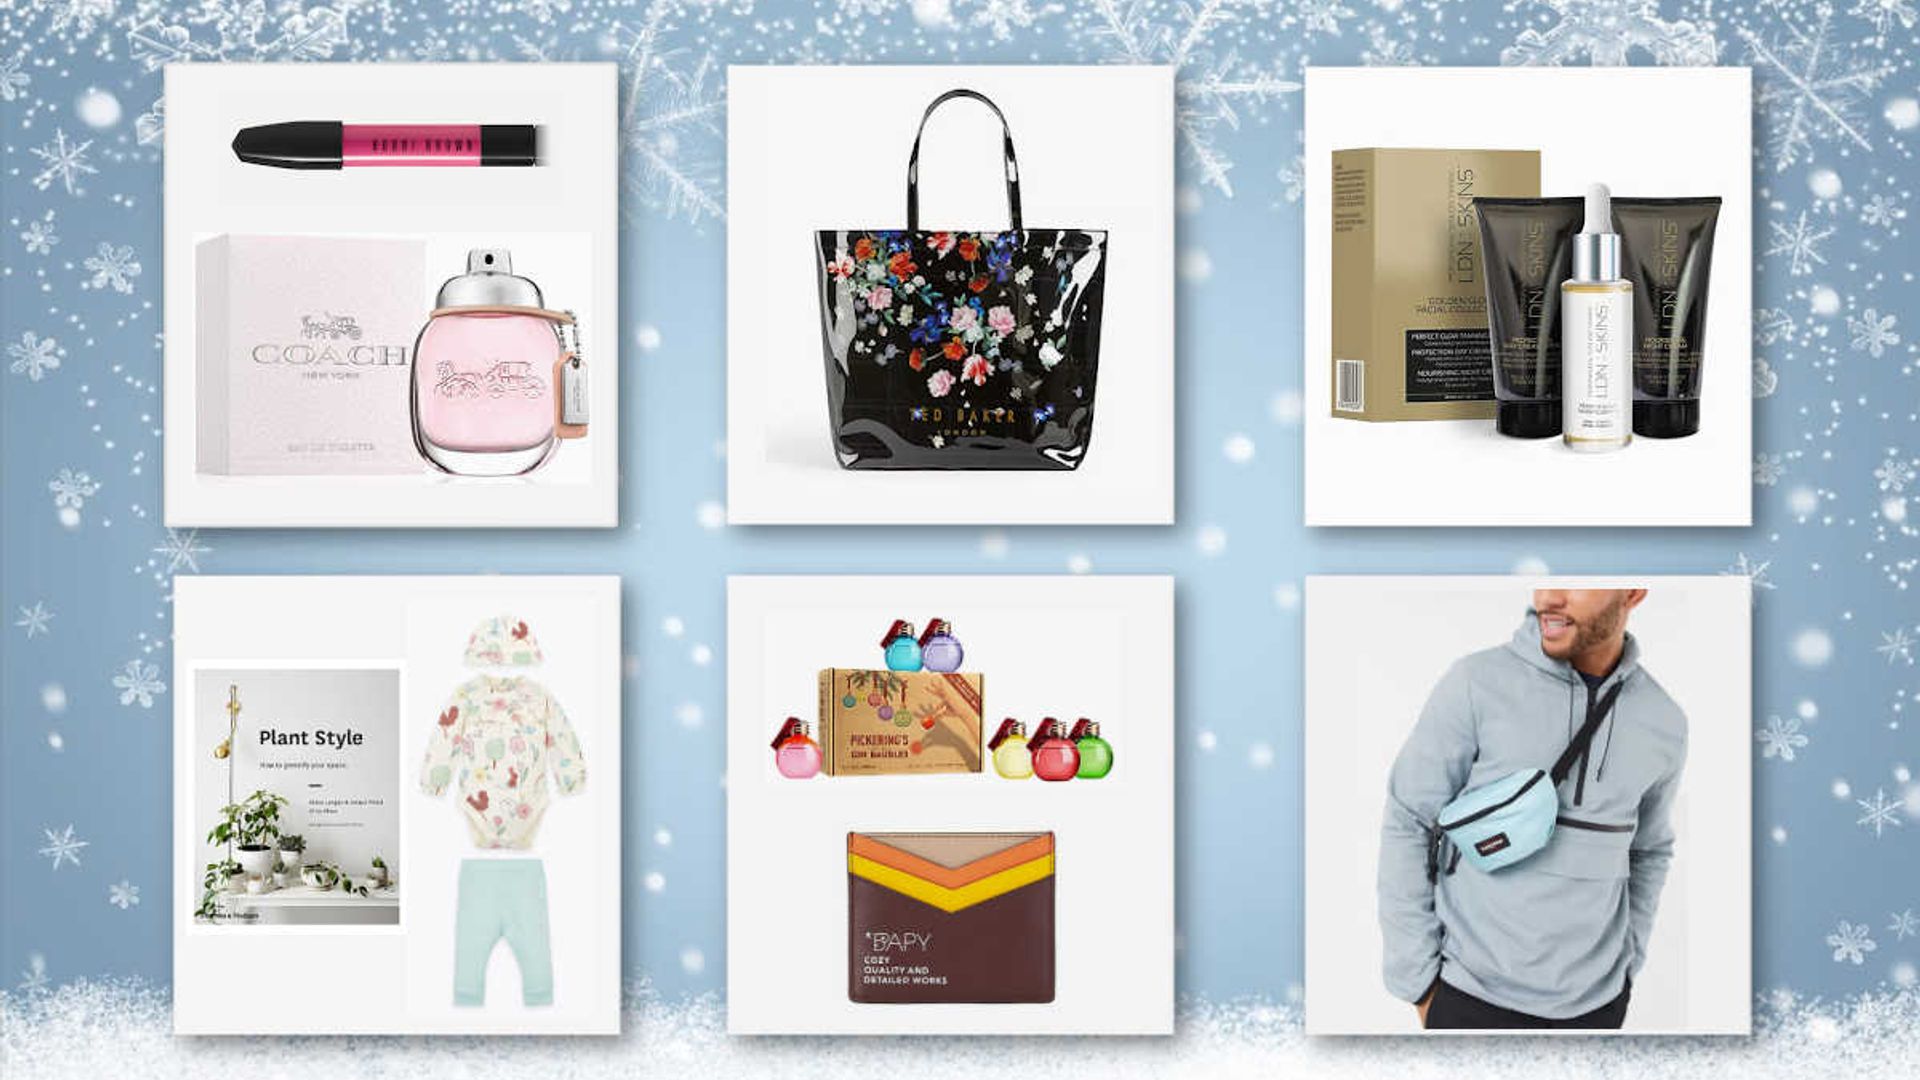 34 chic Christmas gifts on sale now for up to 70% off